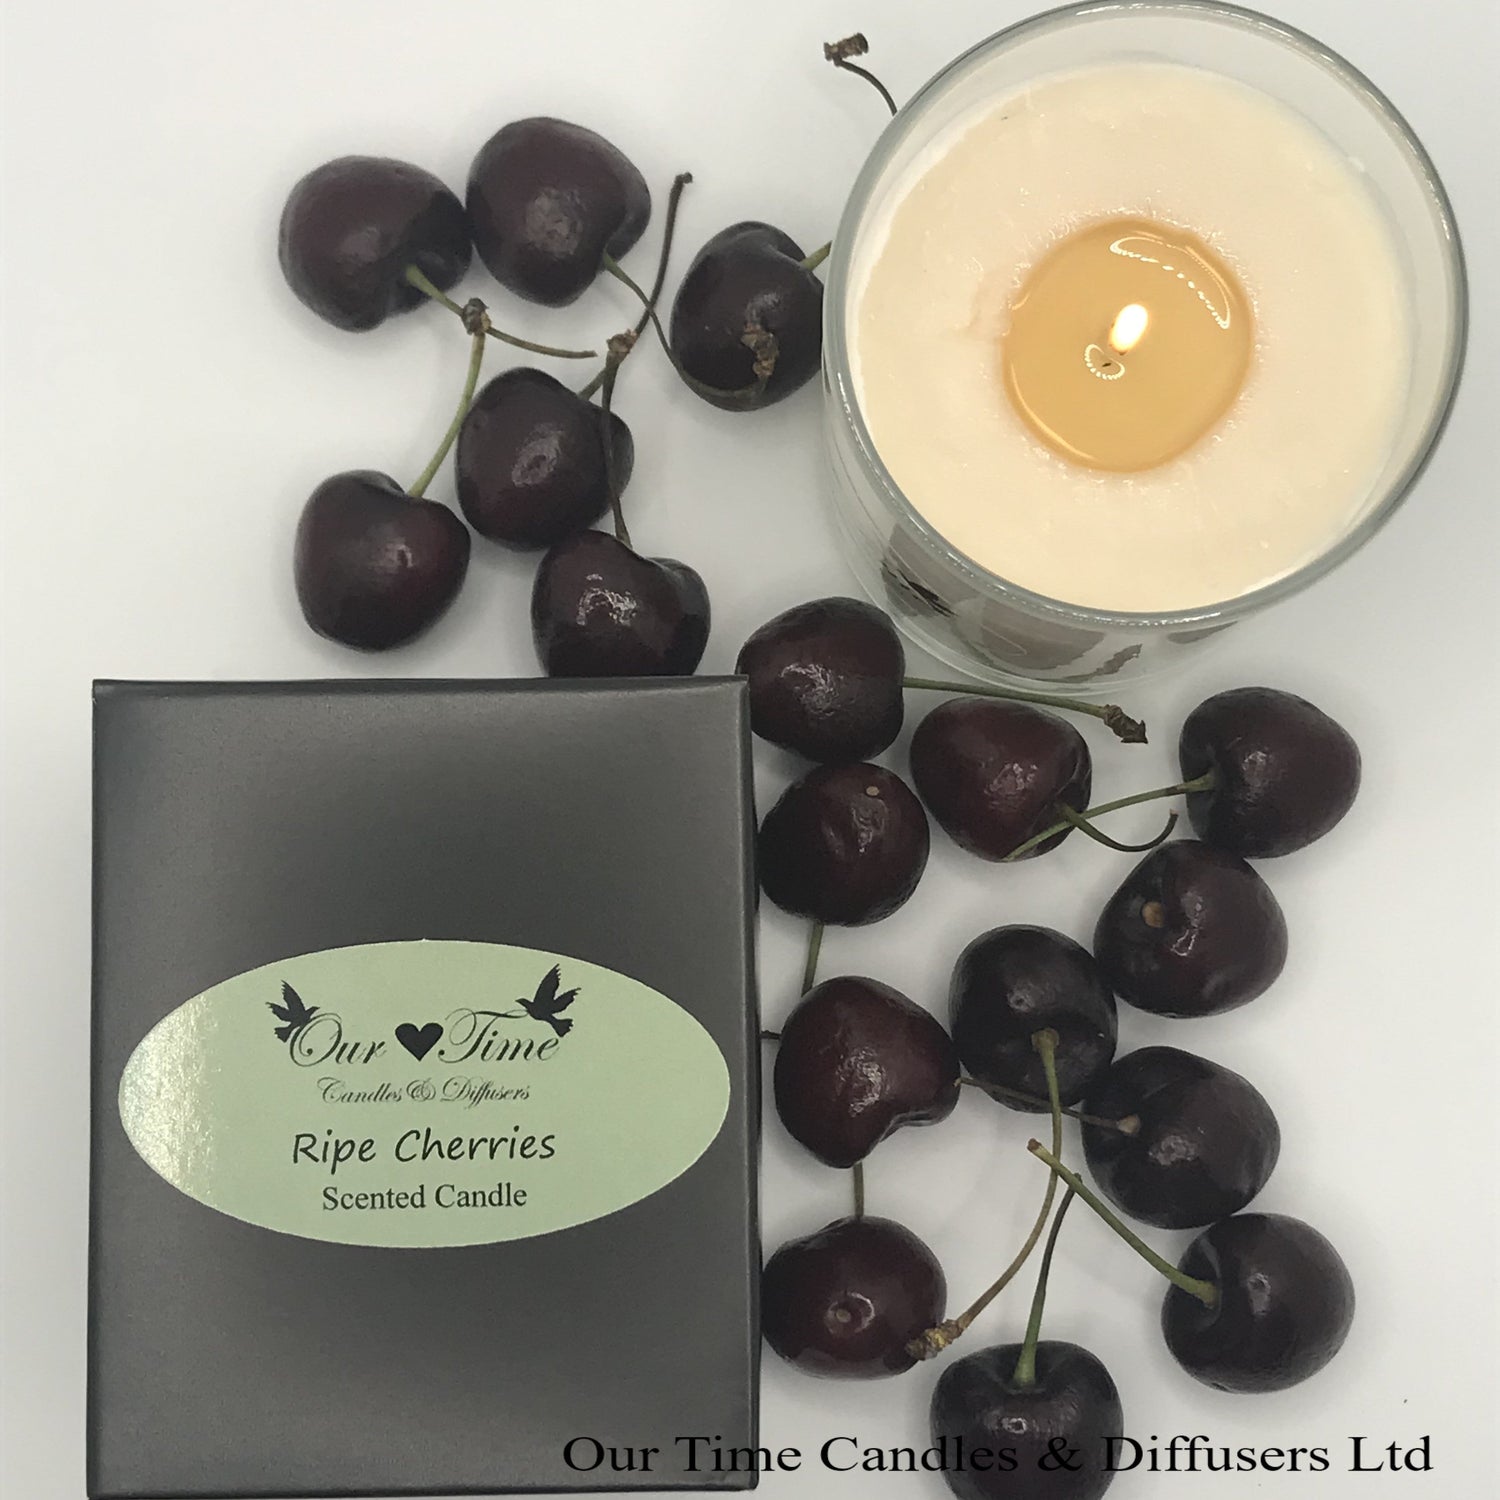 Ripe Cherries - Our Time Candles and Diffusers